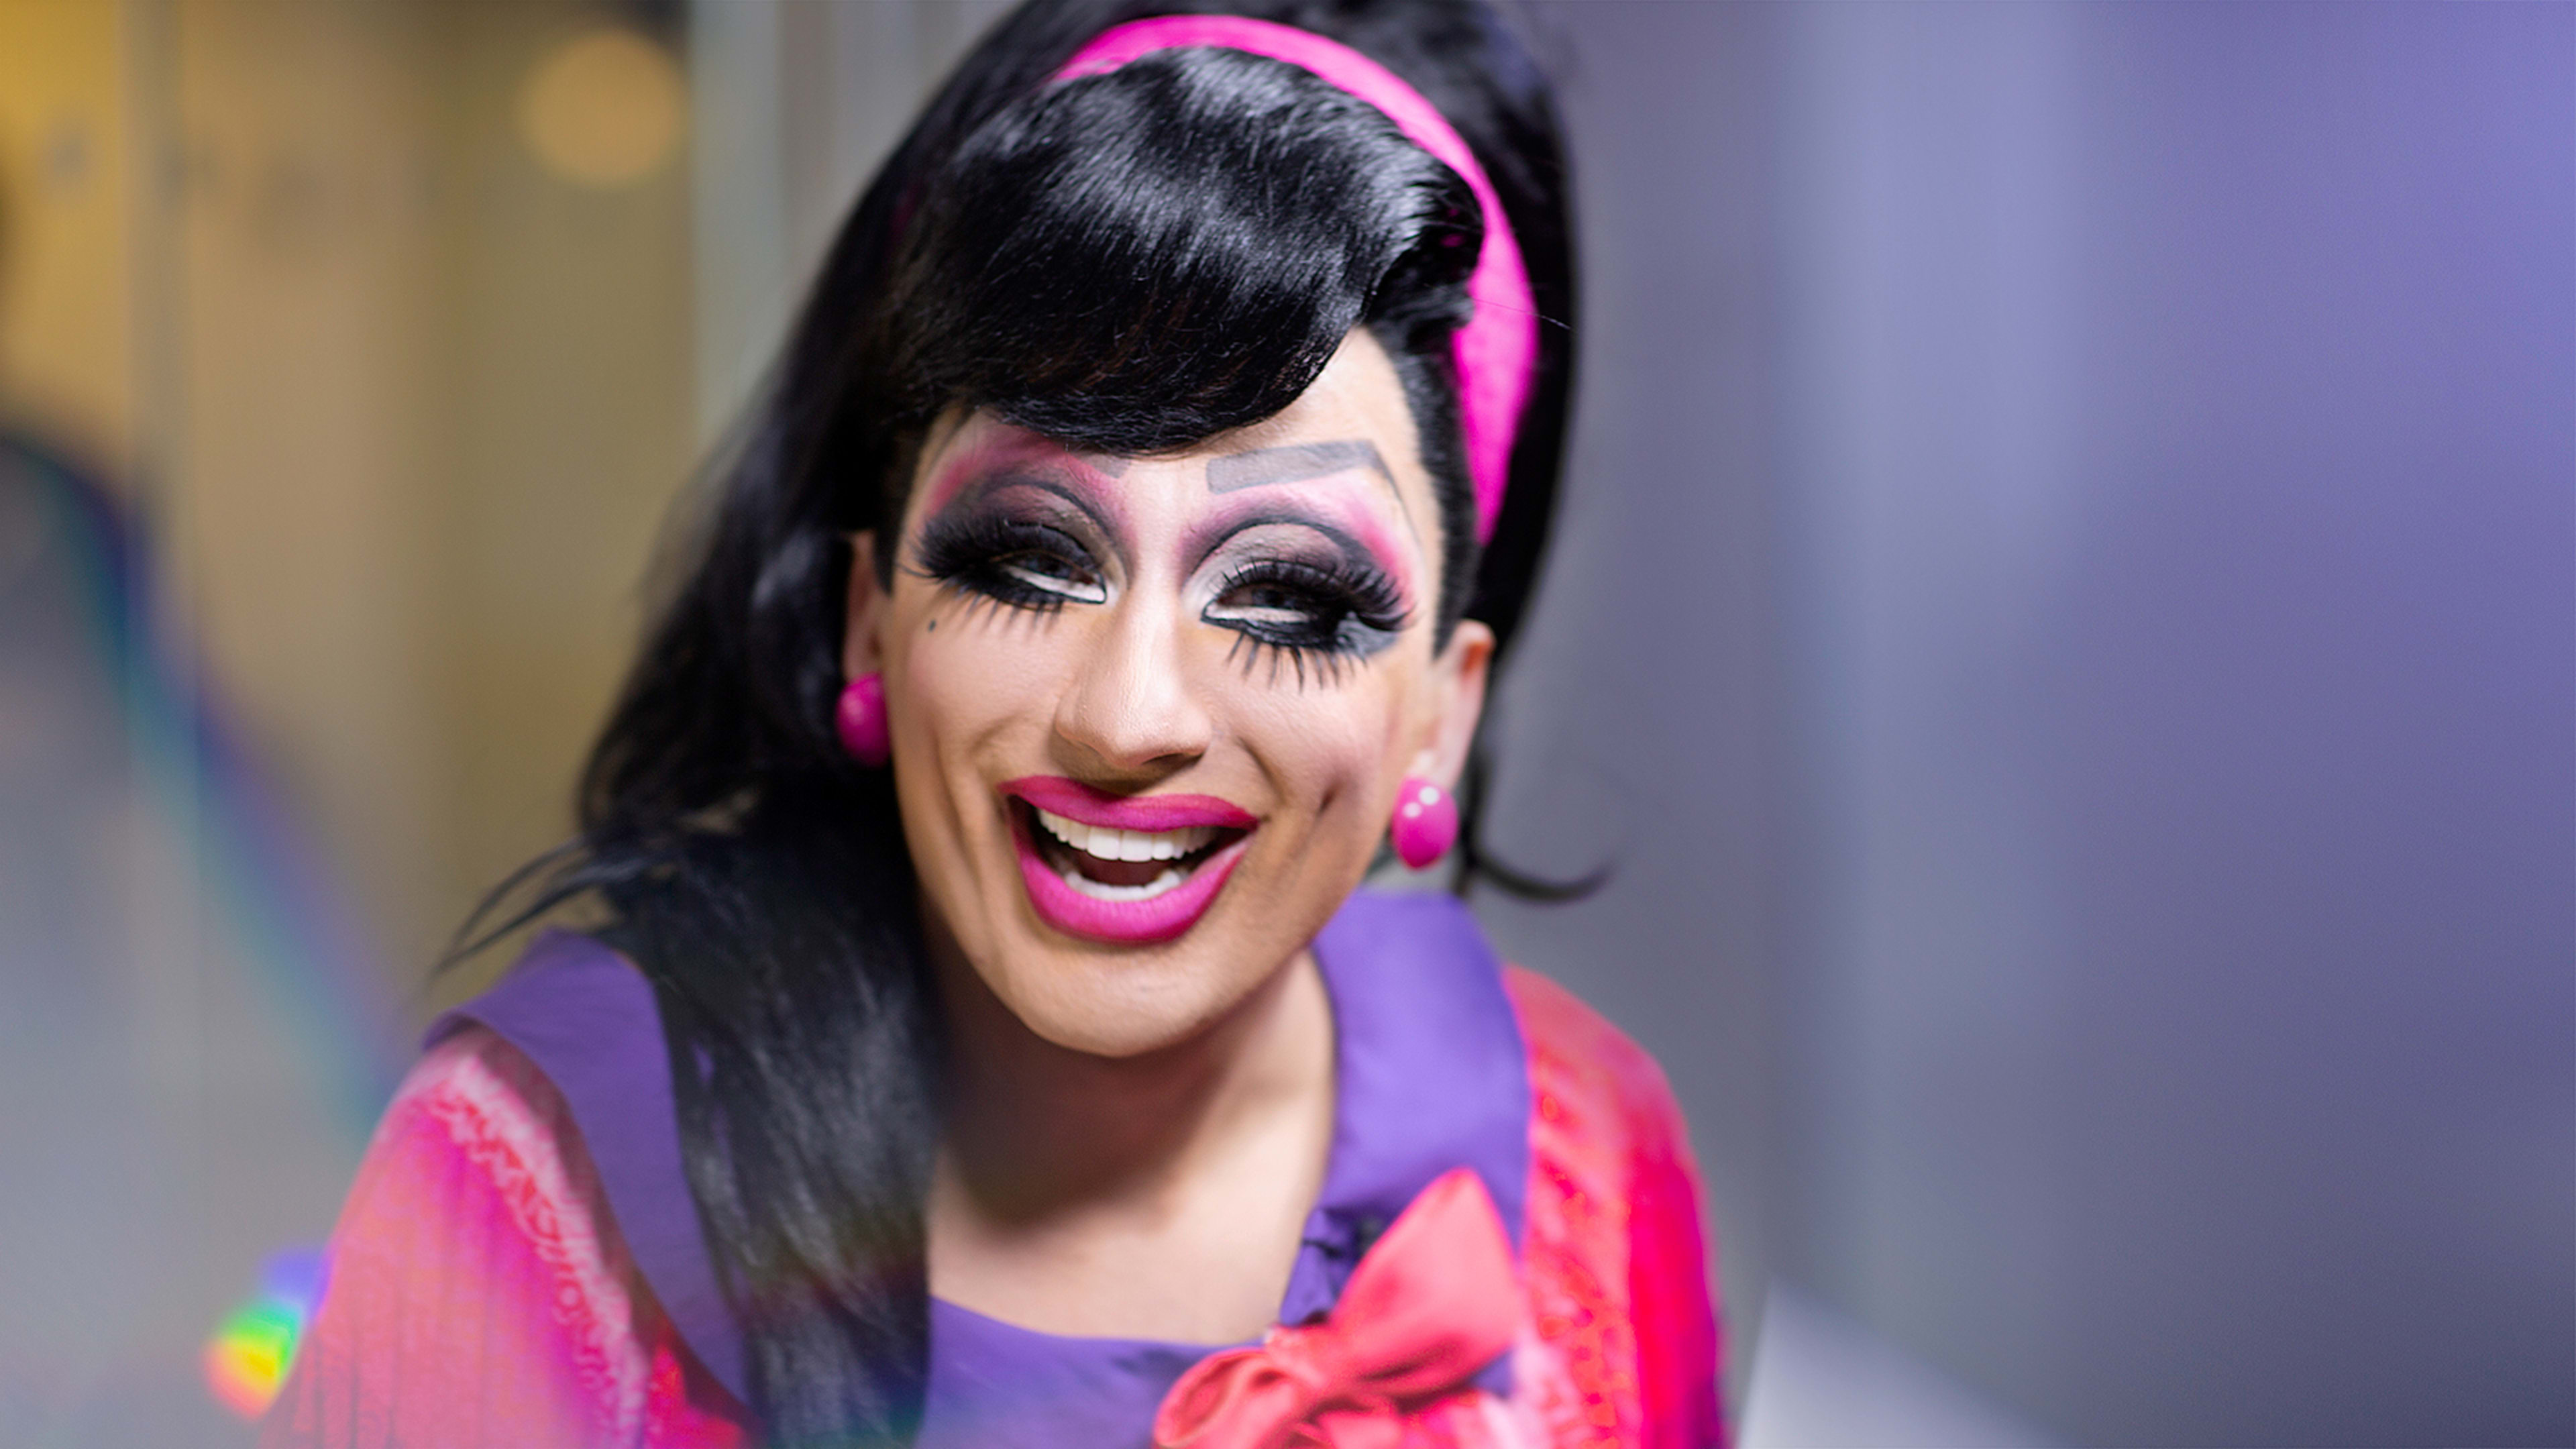 Drag queen Bianca Del Rio on how she built a business out of hate